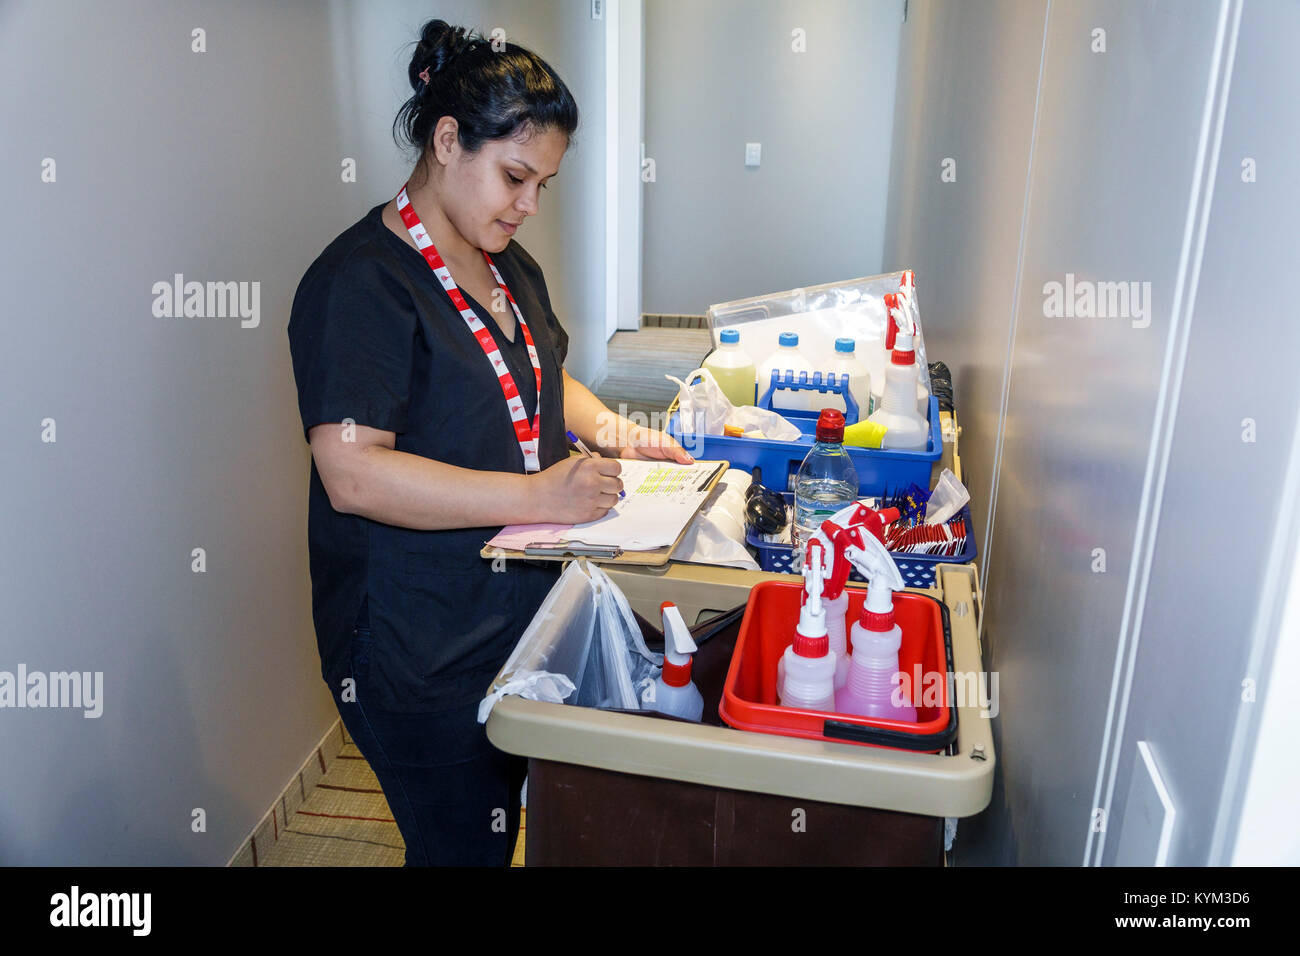 Buenos Aires Argentina,Palermo,Dazzler Polo,hotel,housekeeper housekeeping cleaning,maid,cleaning cart,job,work,Hispanic,woman female women,working,Hi Stock Photo